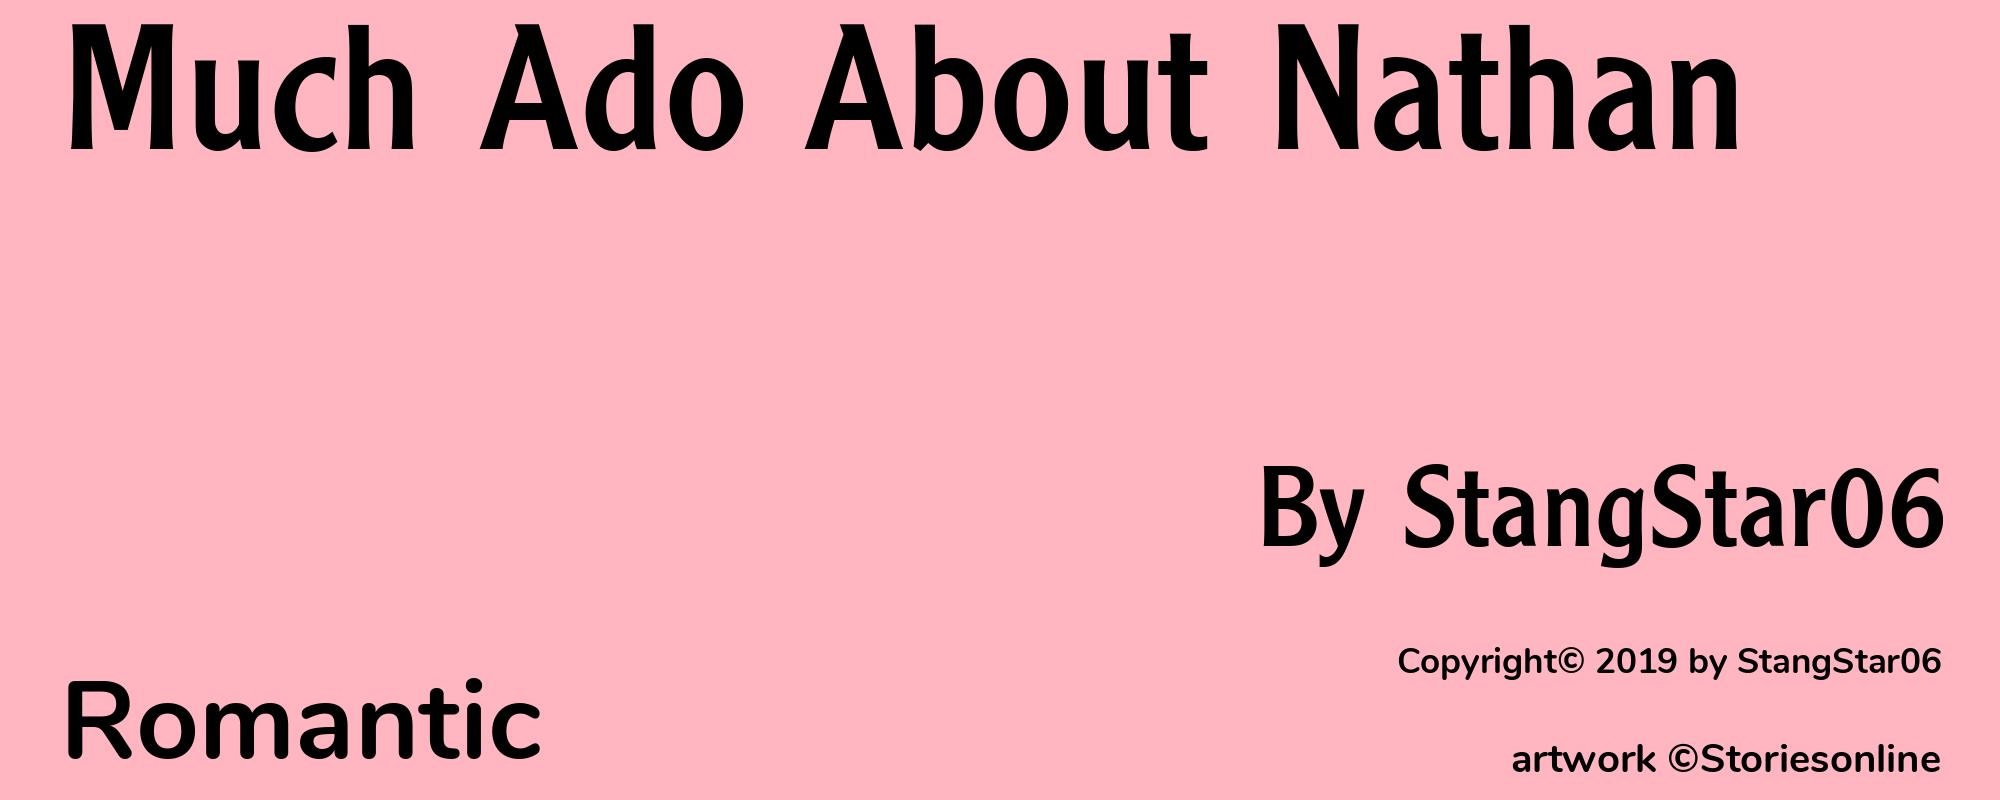 Much Ado About Nathan - Cover